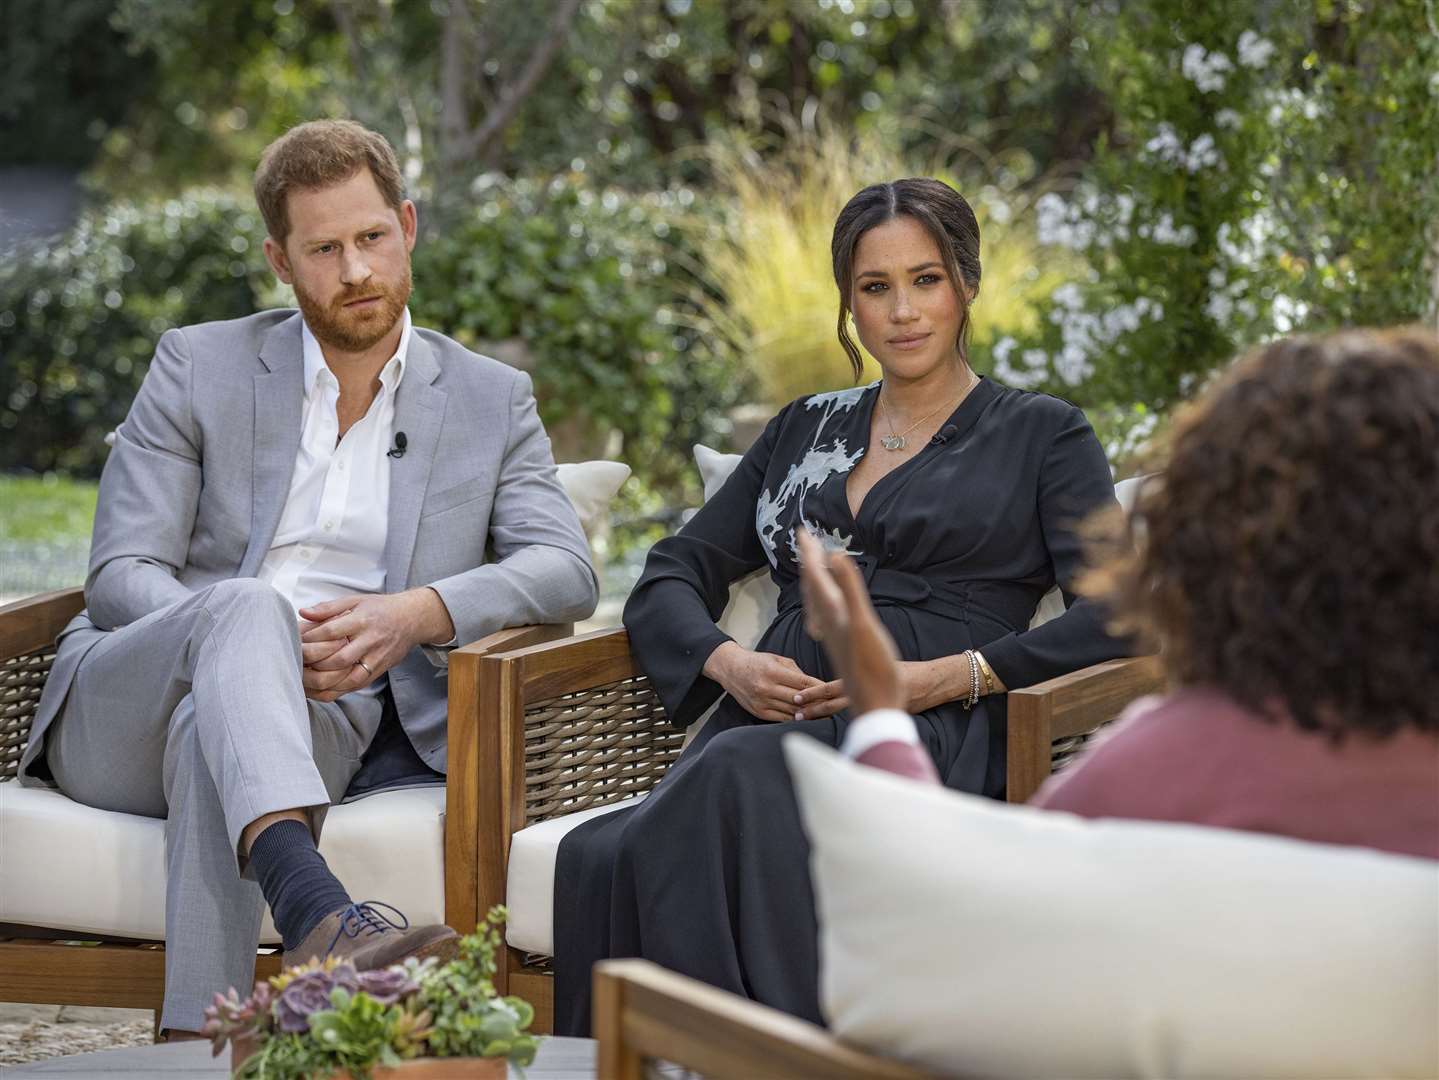 Harry and Meghan during their Oprah Winfrey interview (Joe Pugliese/Harpo Productions)